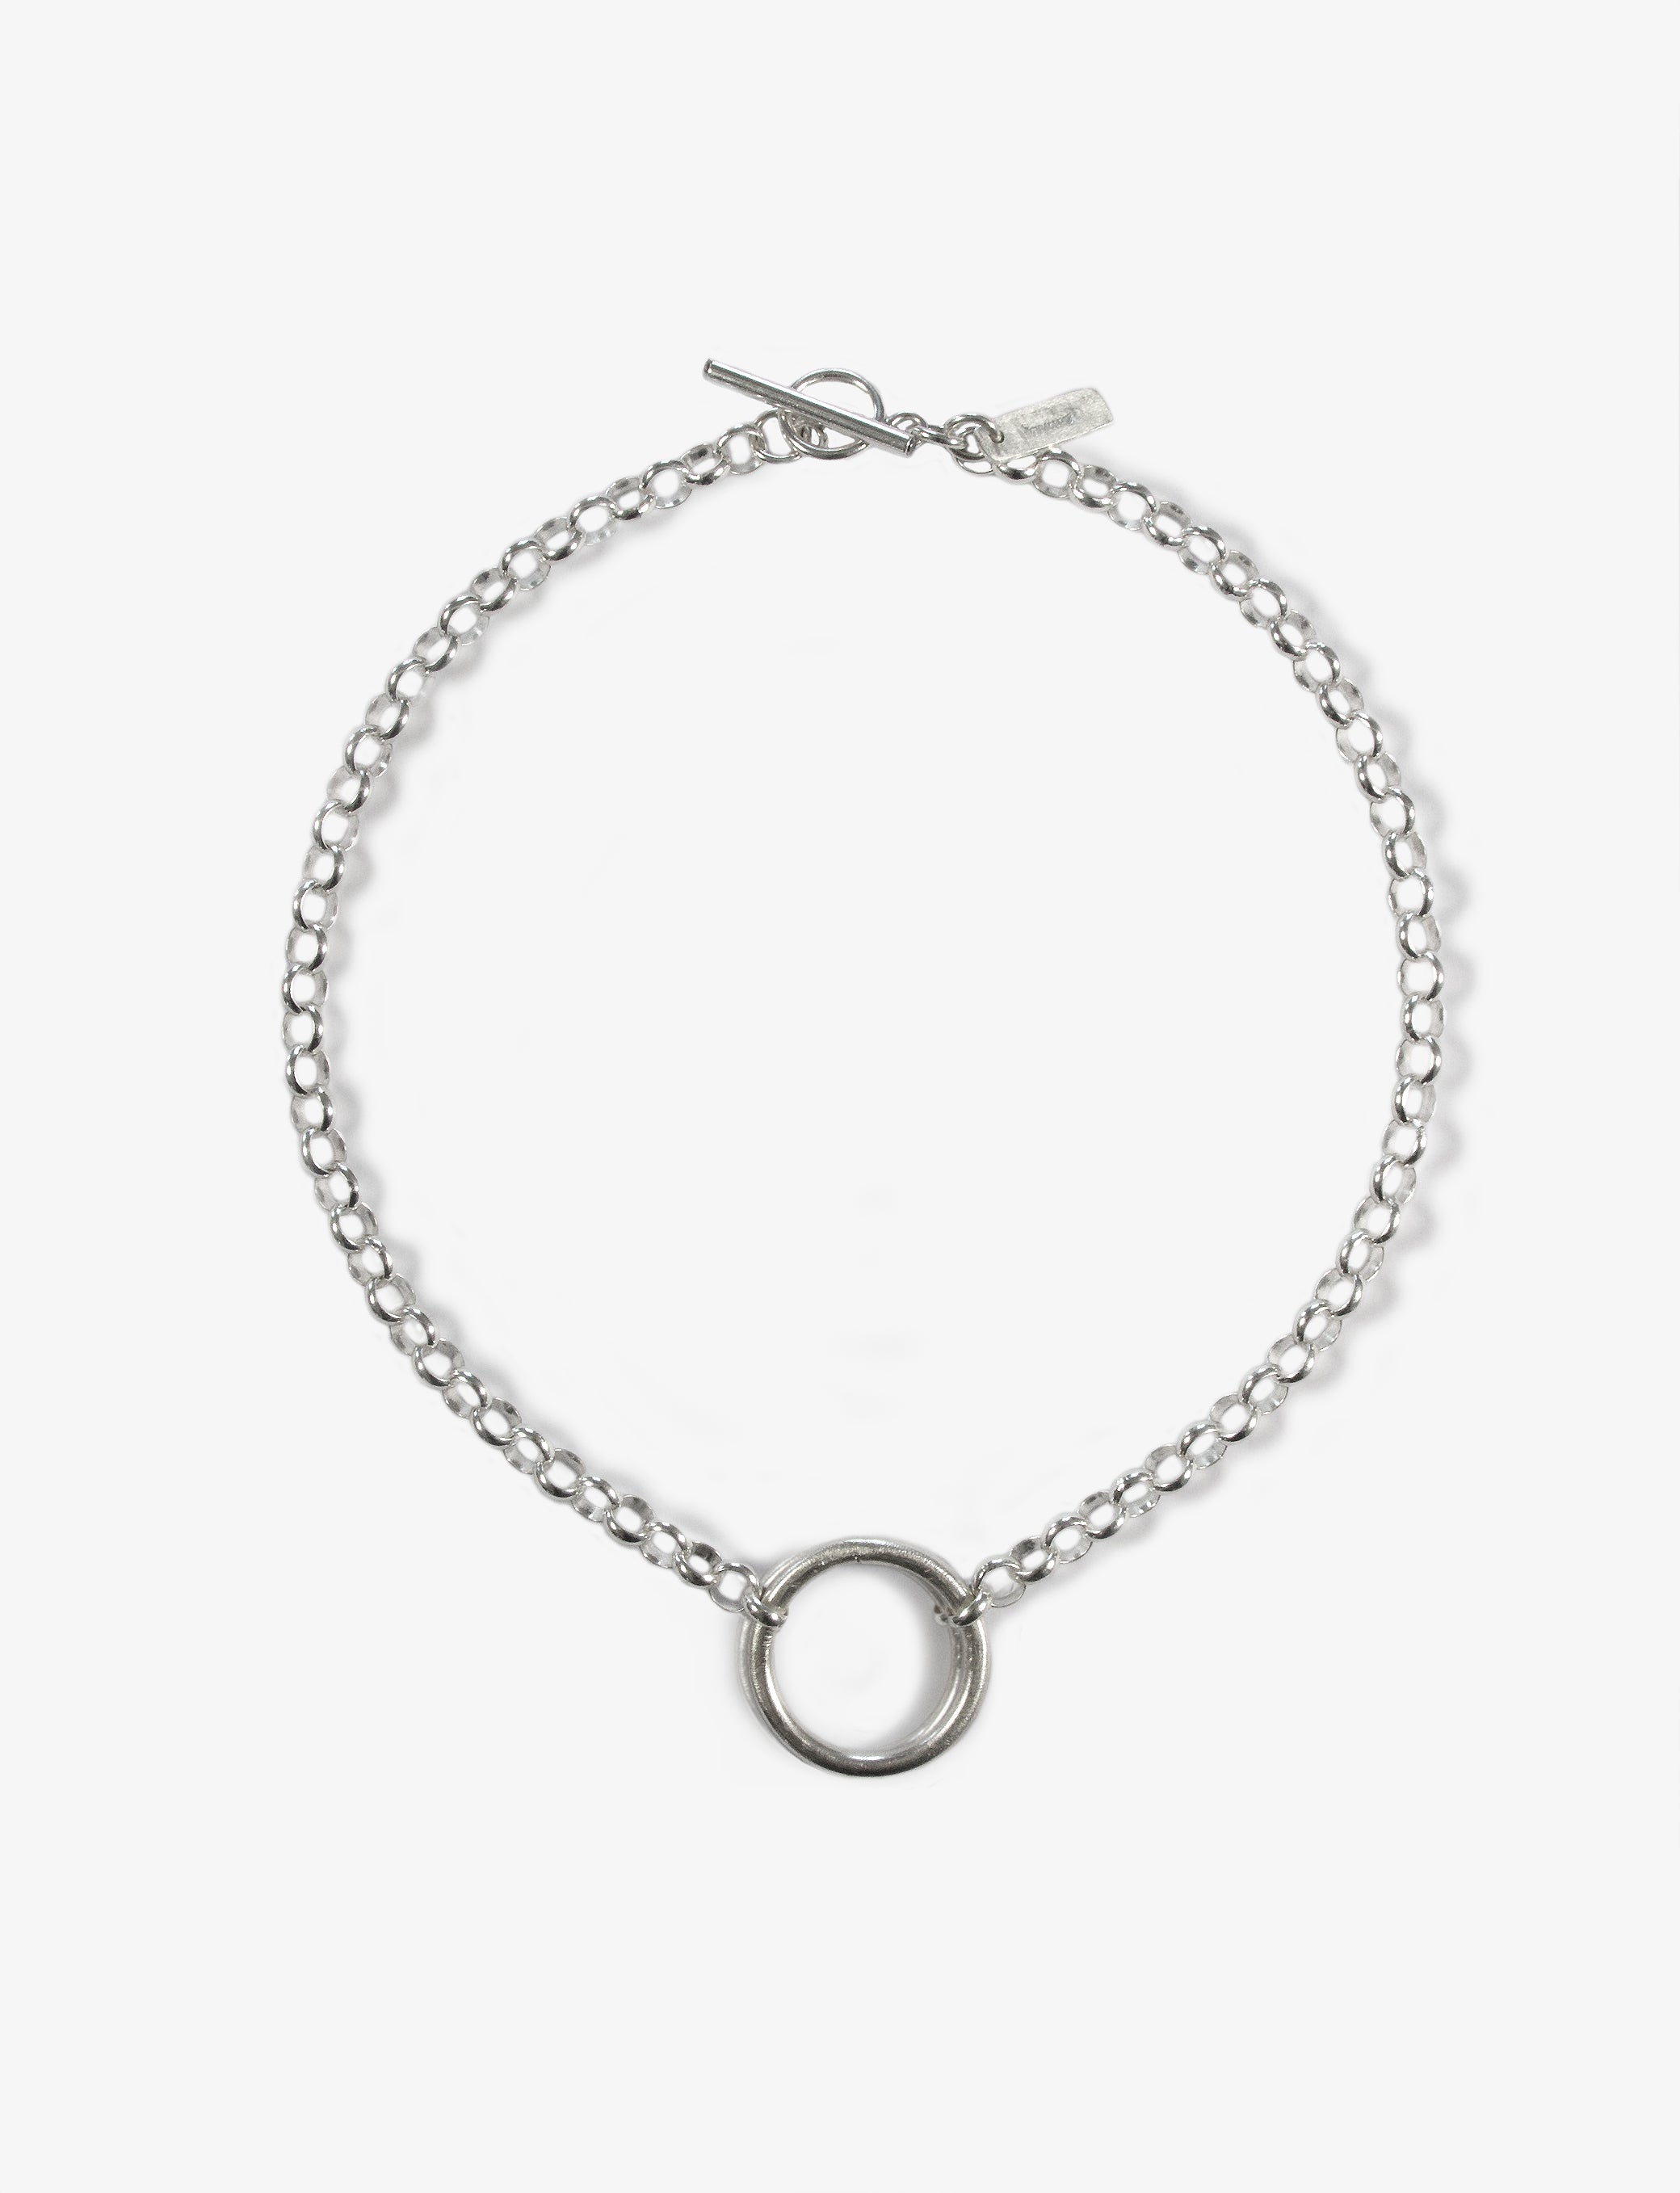 llayers jewelry choker collier chaîne argent silver minimal necklace 